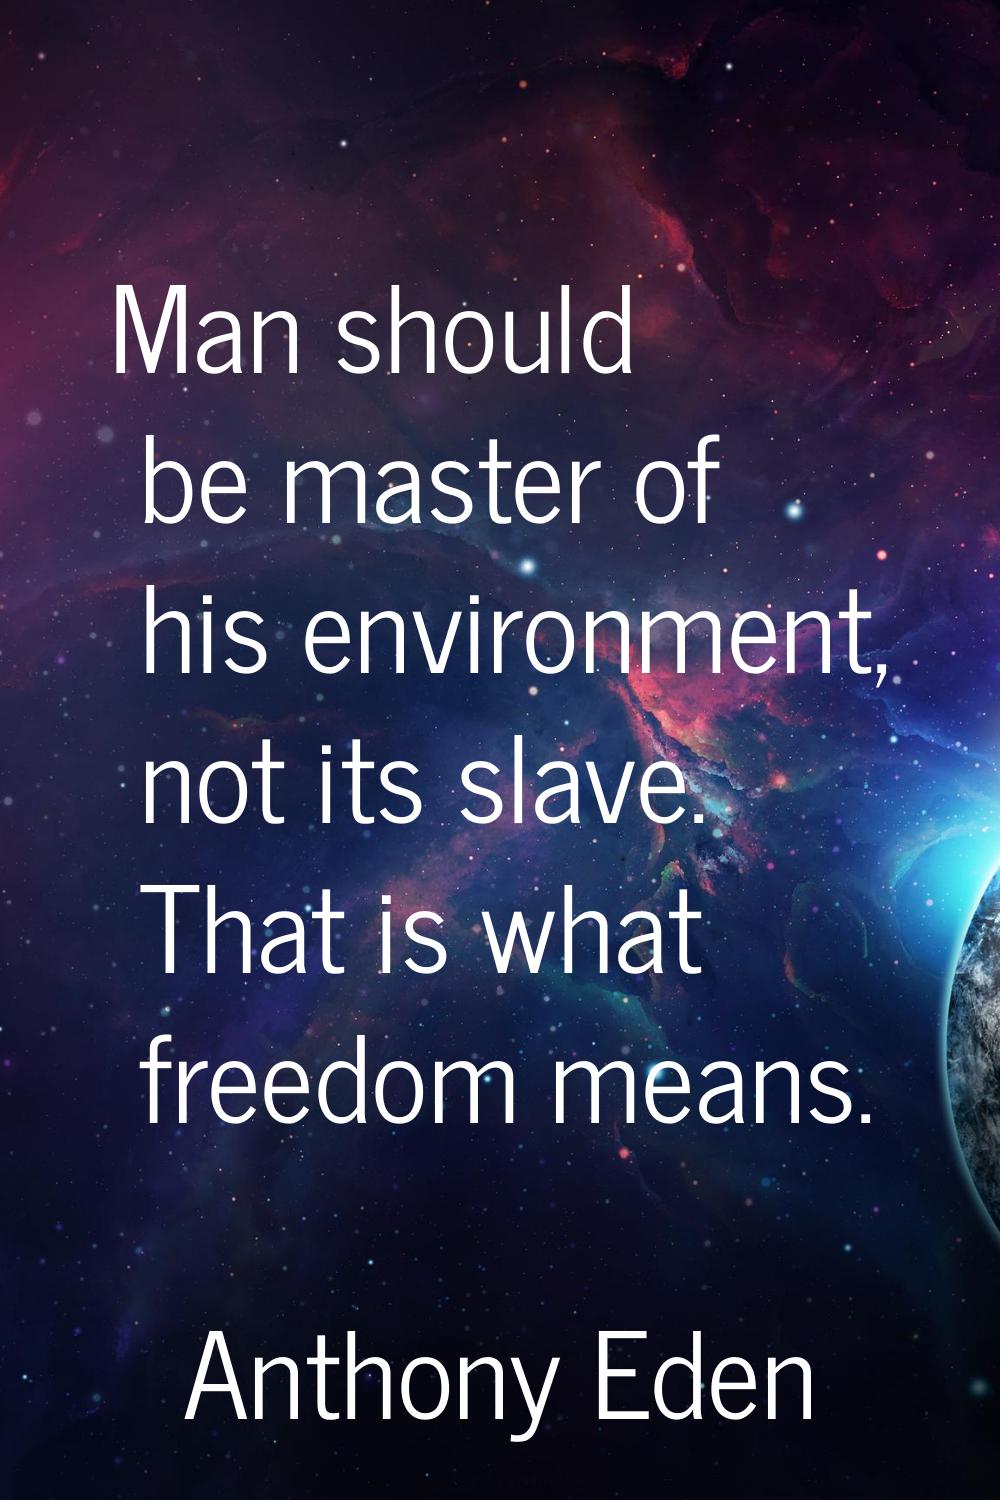 Man should be master of his environment, not its slave. That is what freedom means.